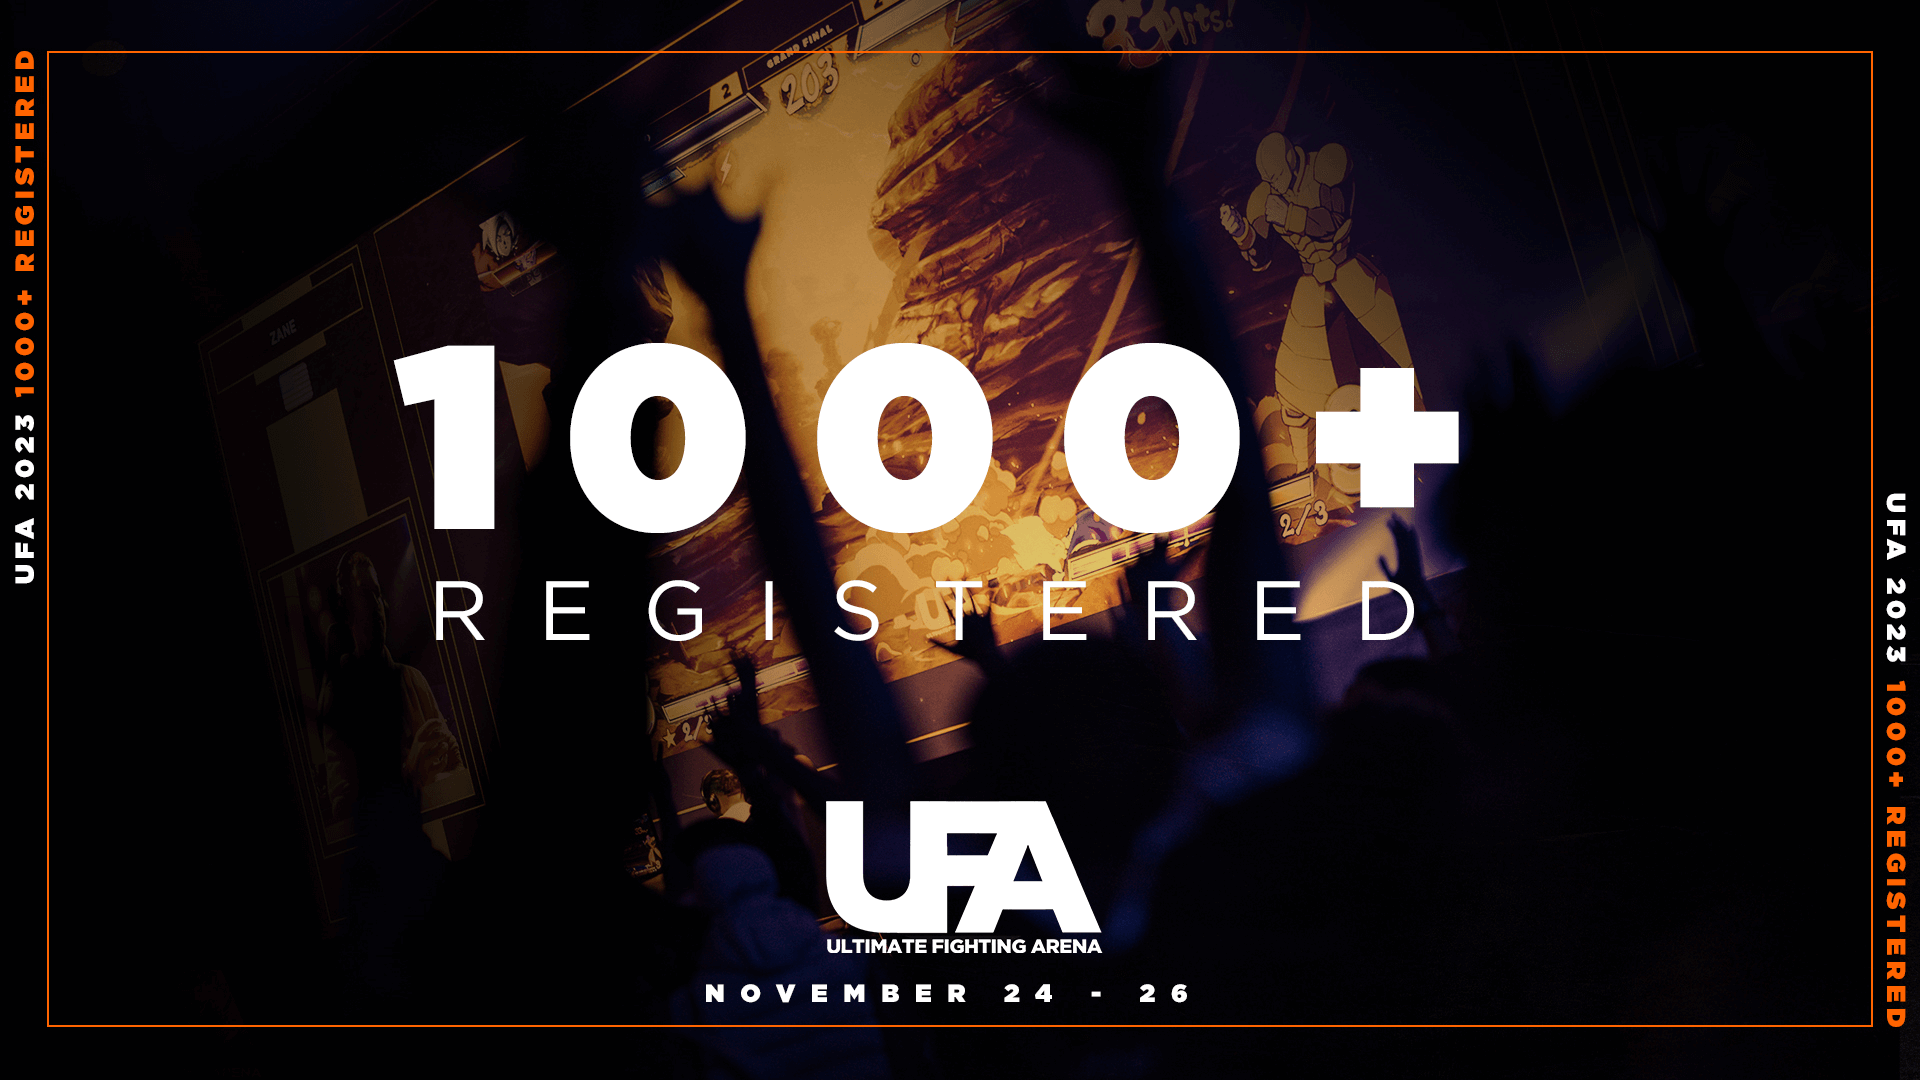 More than 1000 Already Registered for UFA 2023